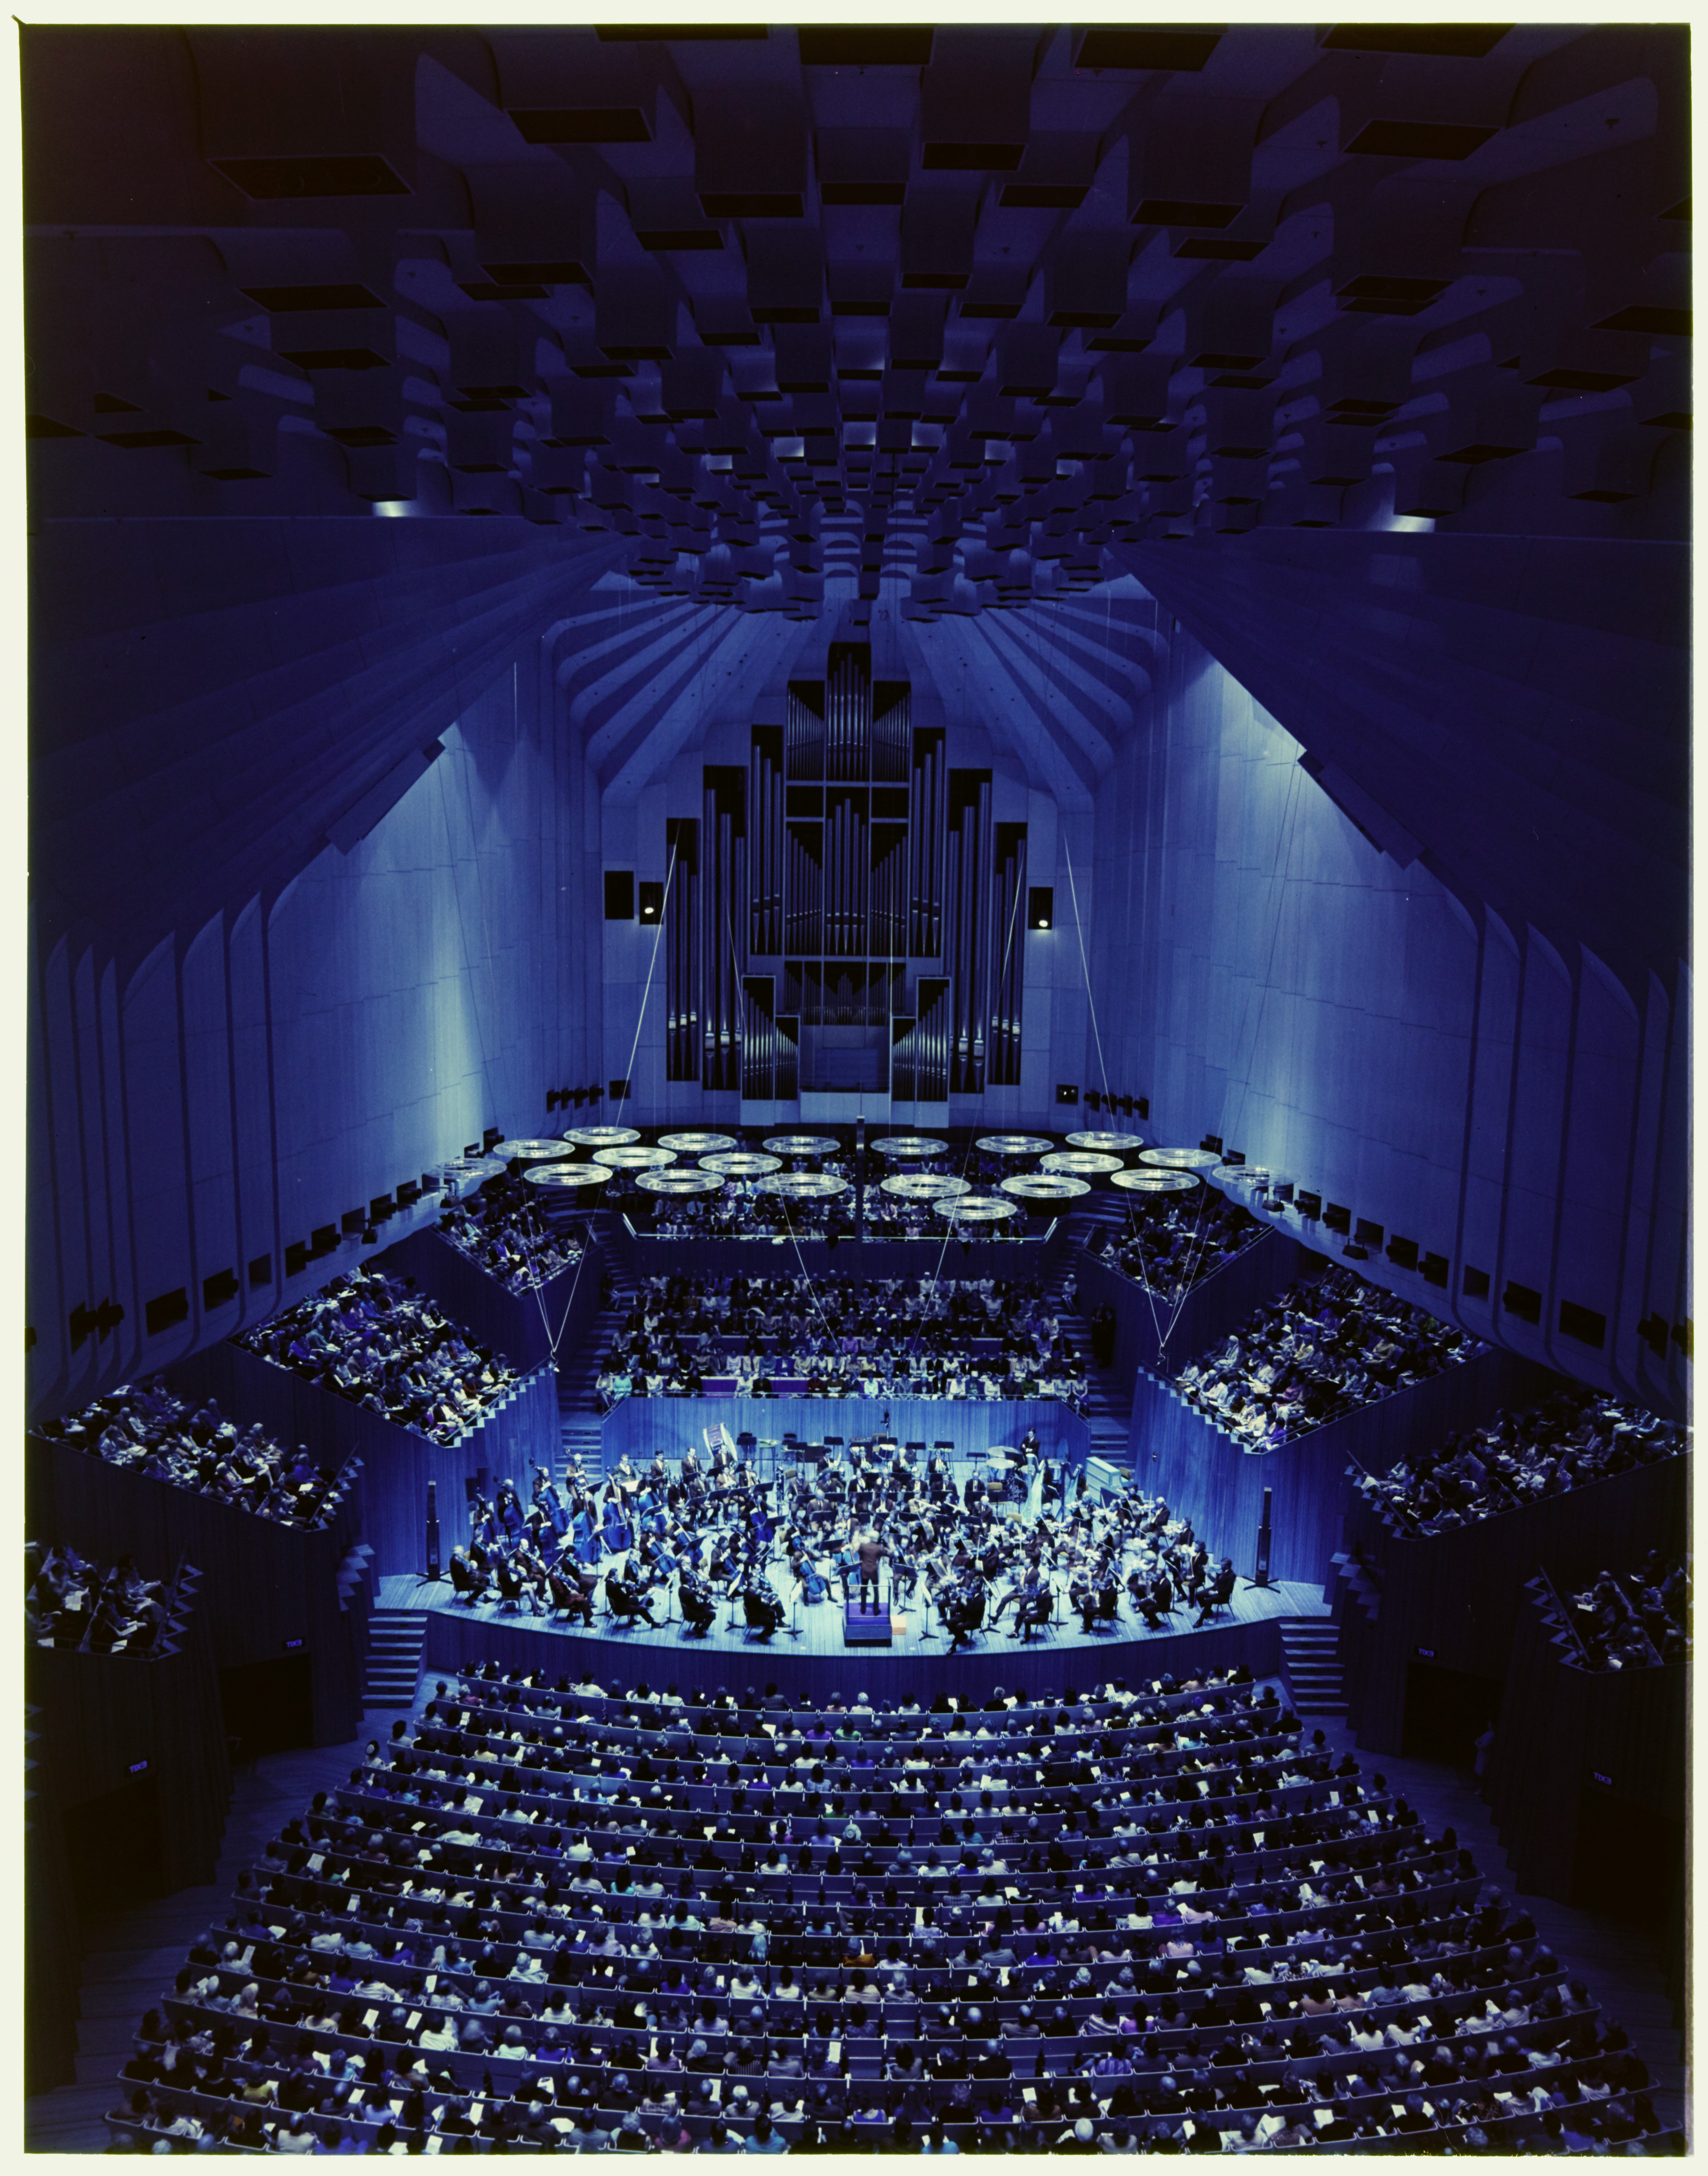 The Concert Hall at Sydney Opera House.